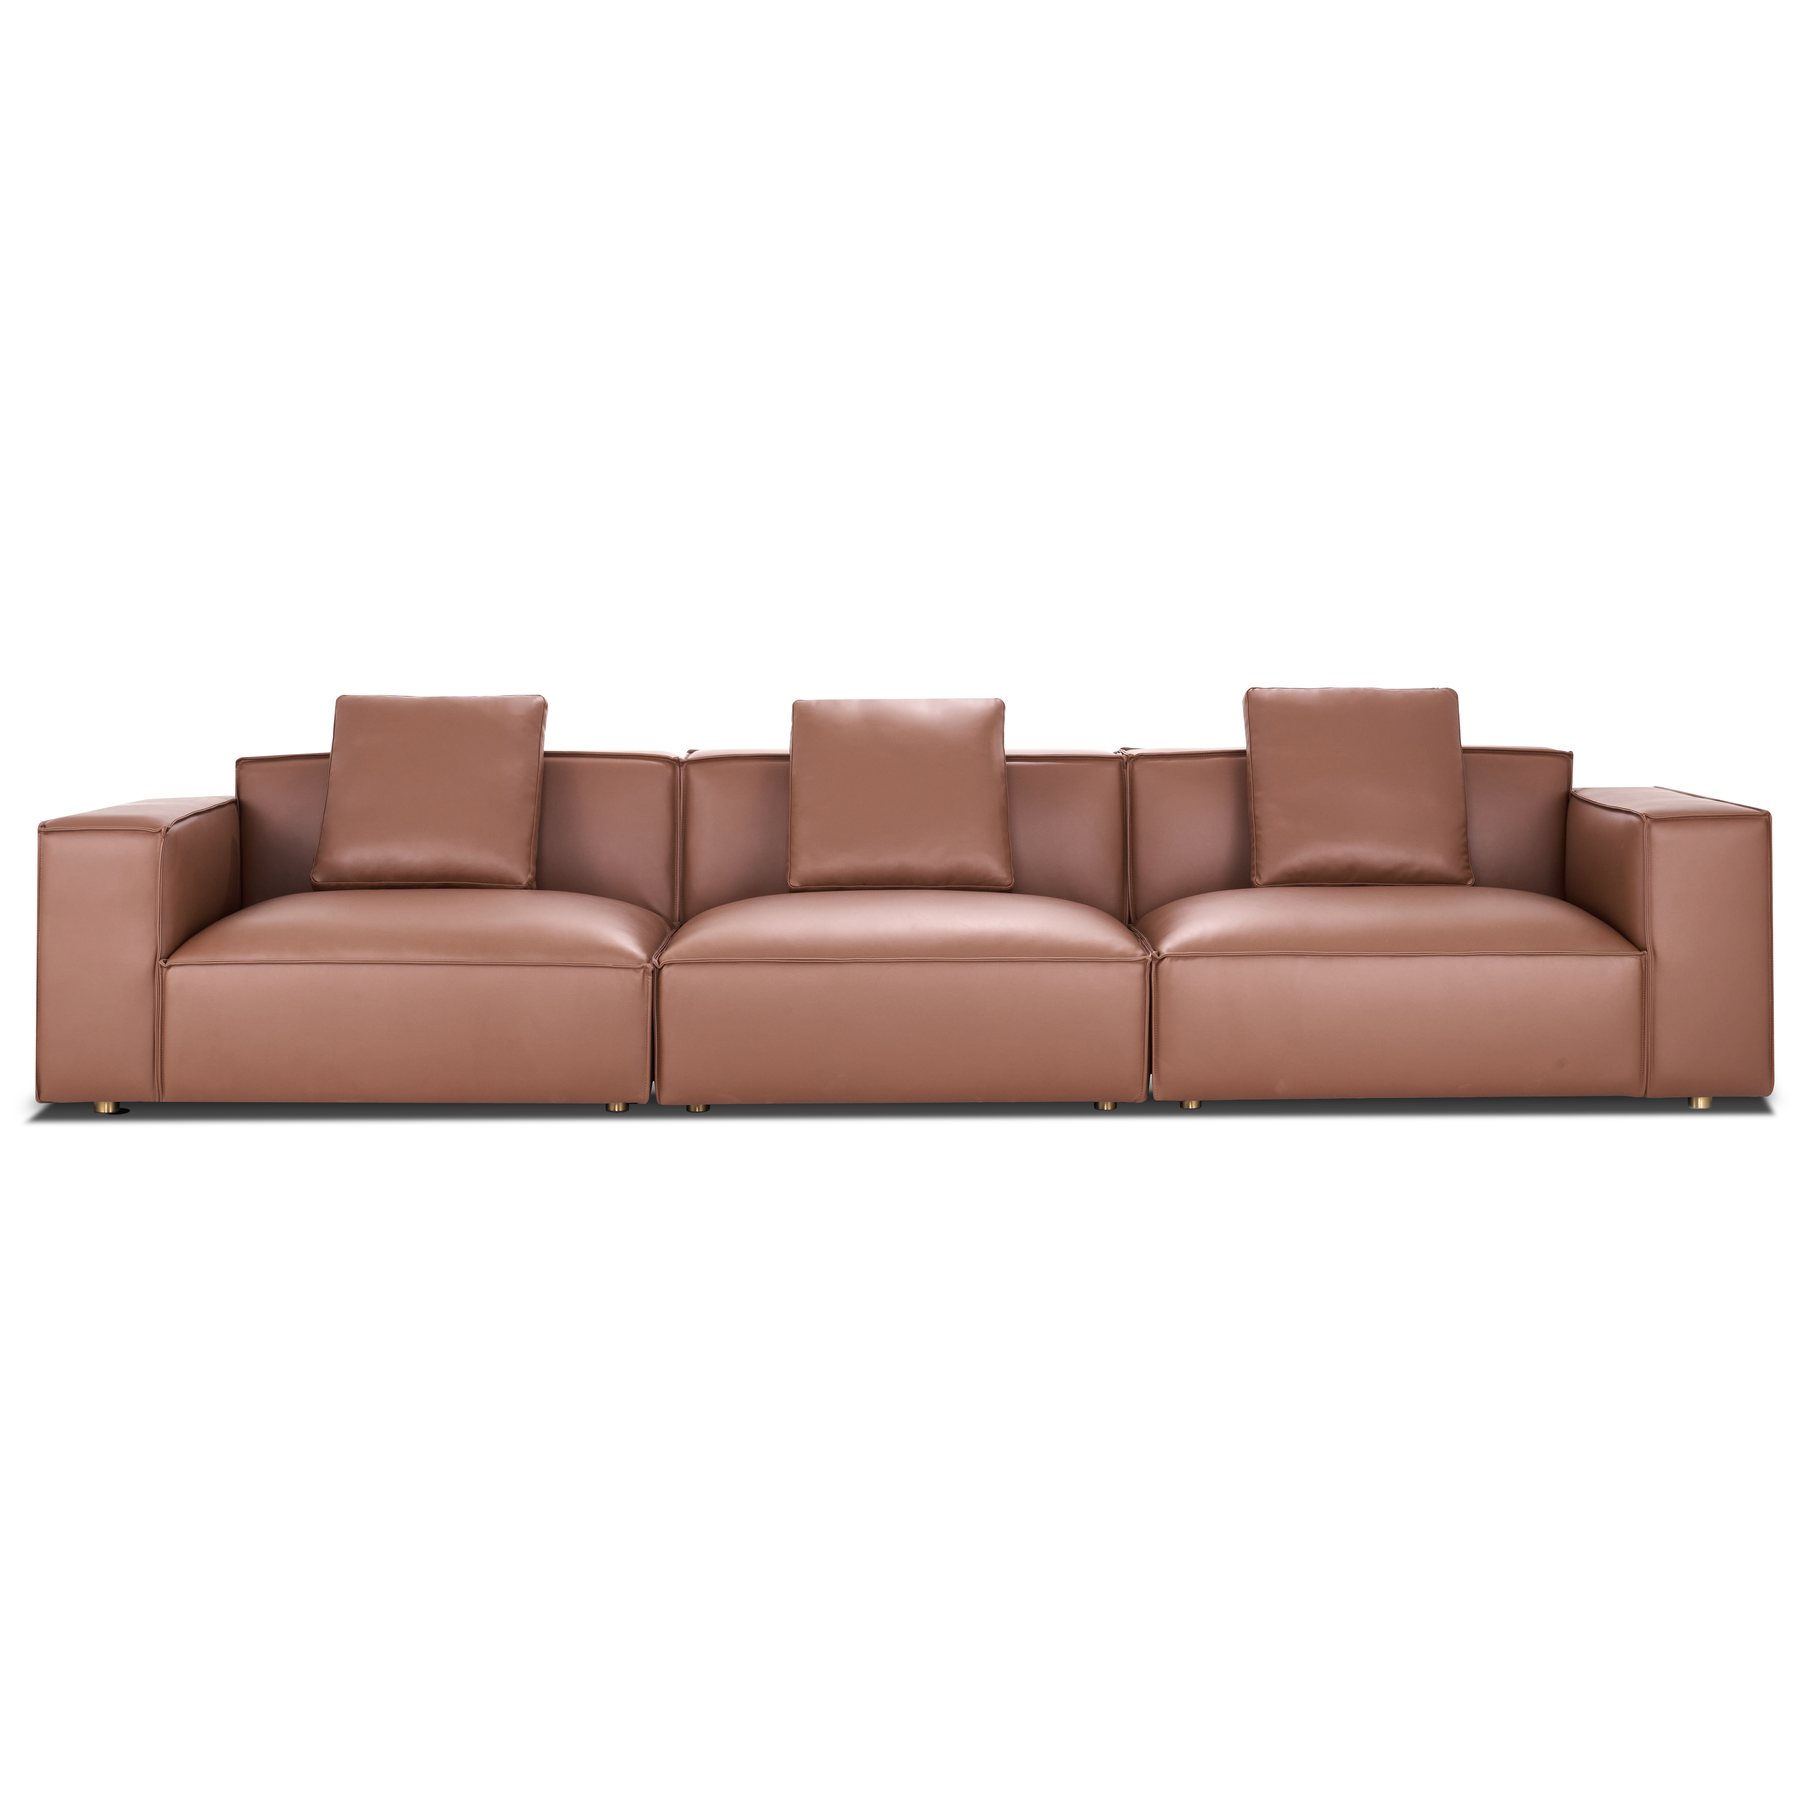 Modern Italian Brown Microfiber Leather Sofa, with Armrest, with Cushions